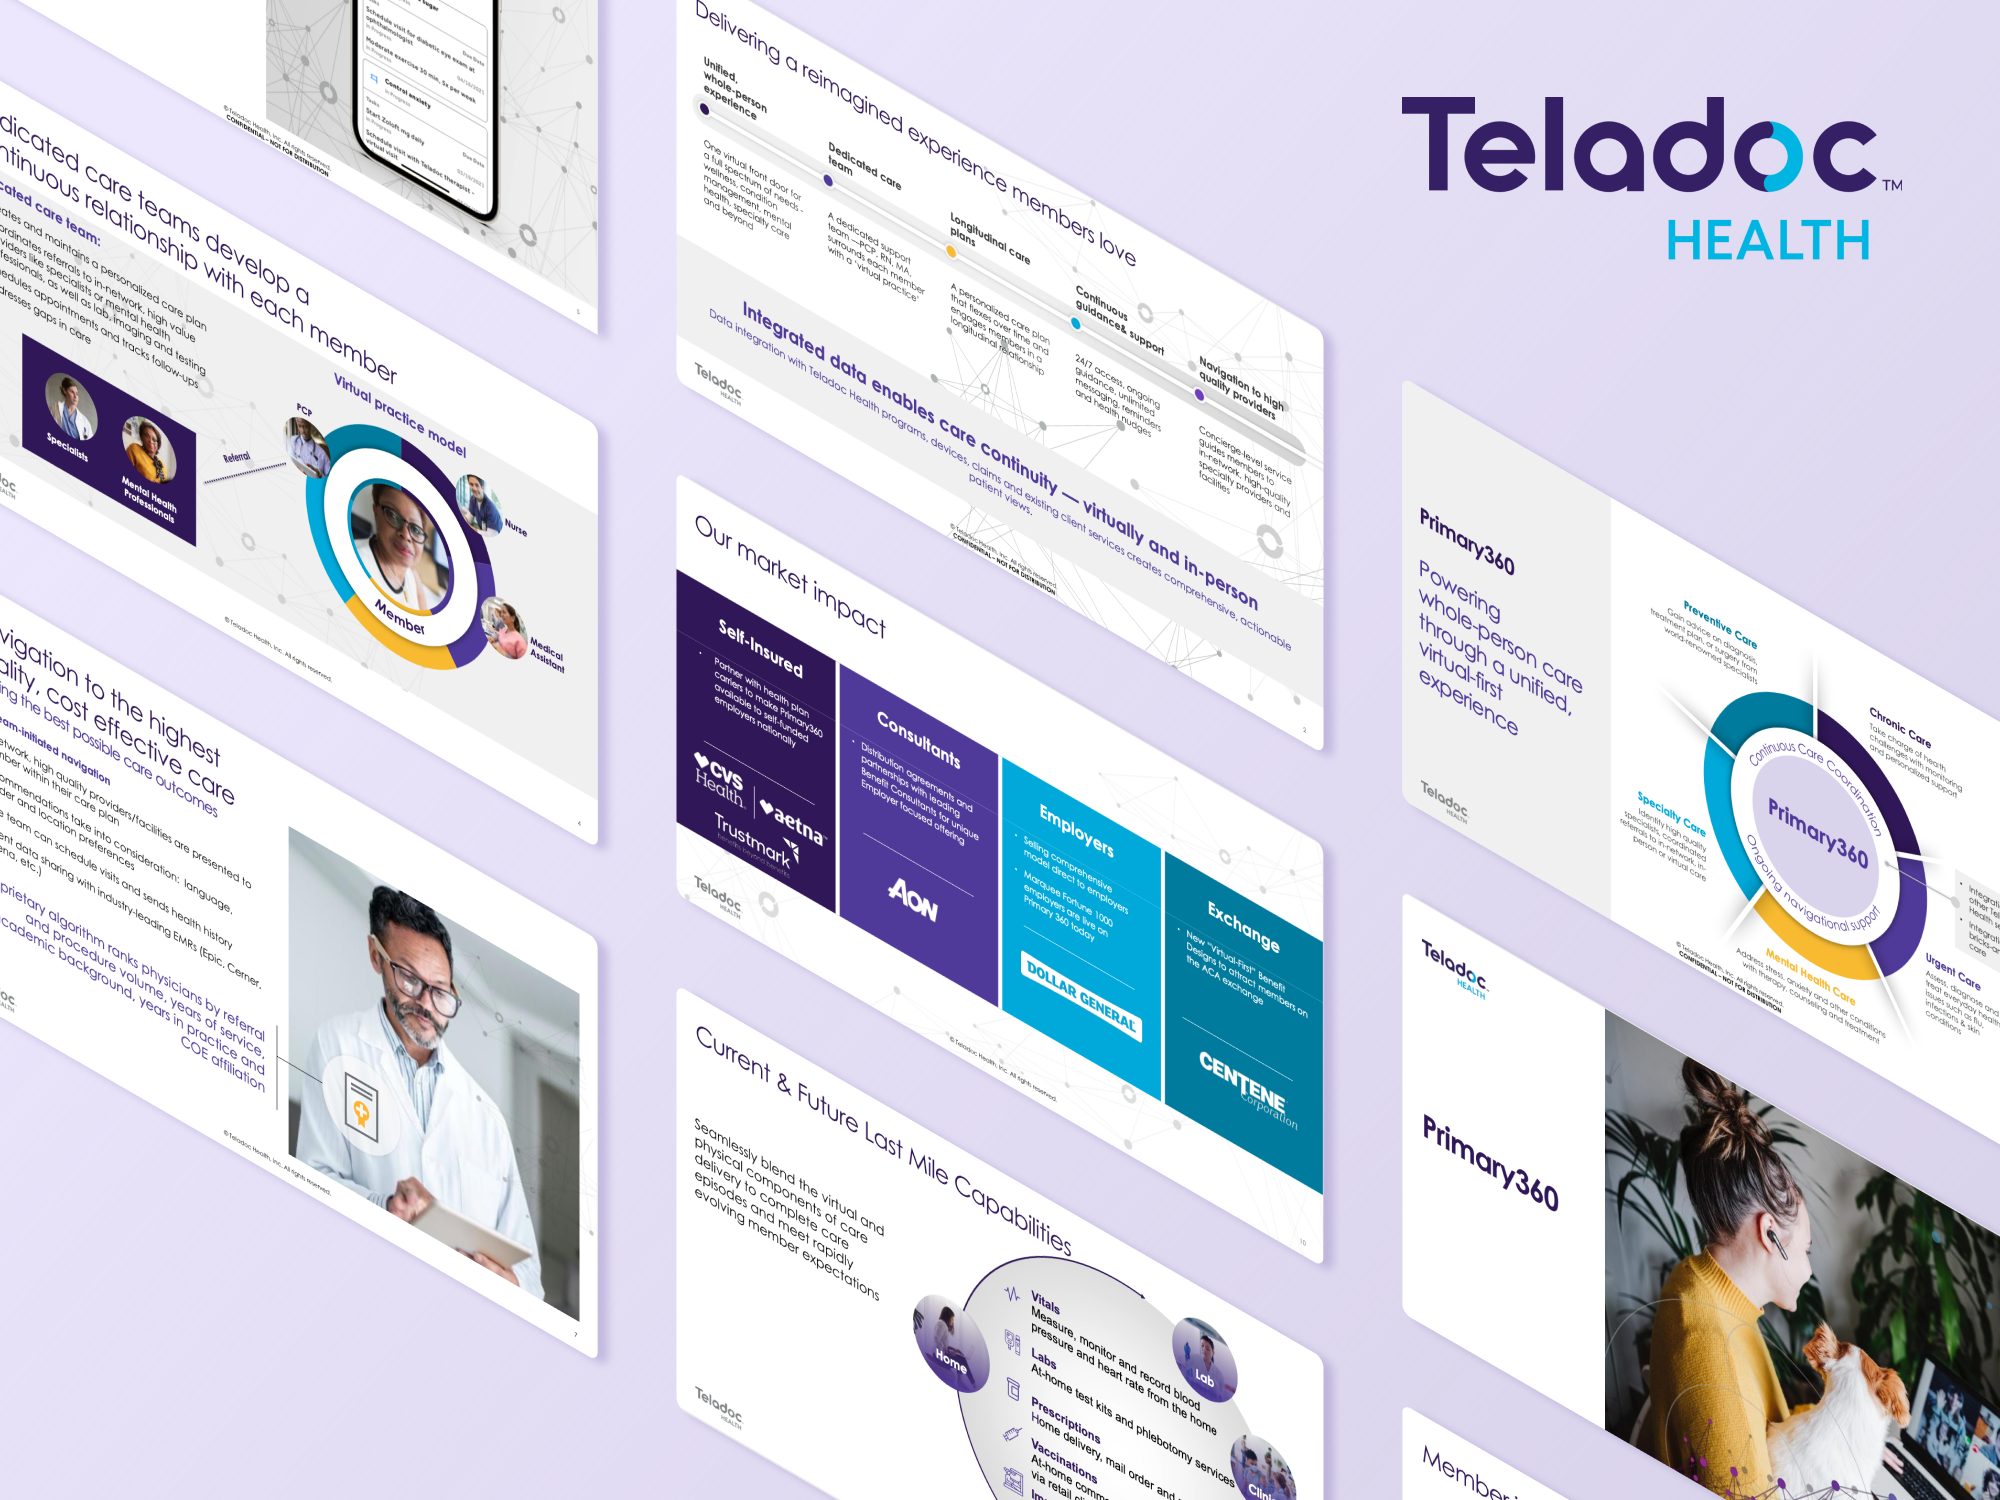 Teladoc signed 50 health plans onto Primary360 with this sales deck